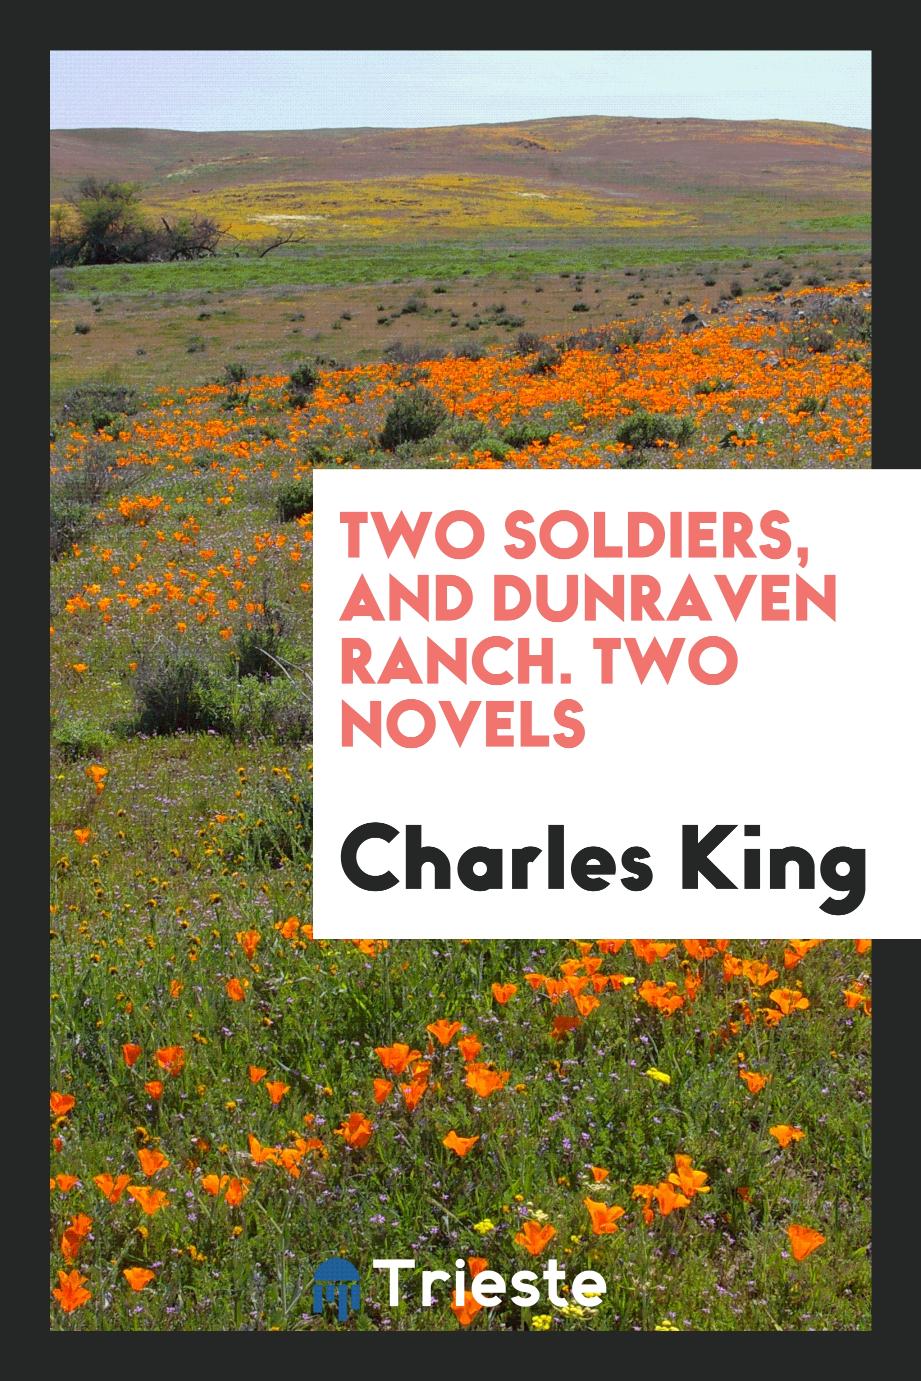 Two soldiers, and Dunraven ranch. Two novels